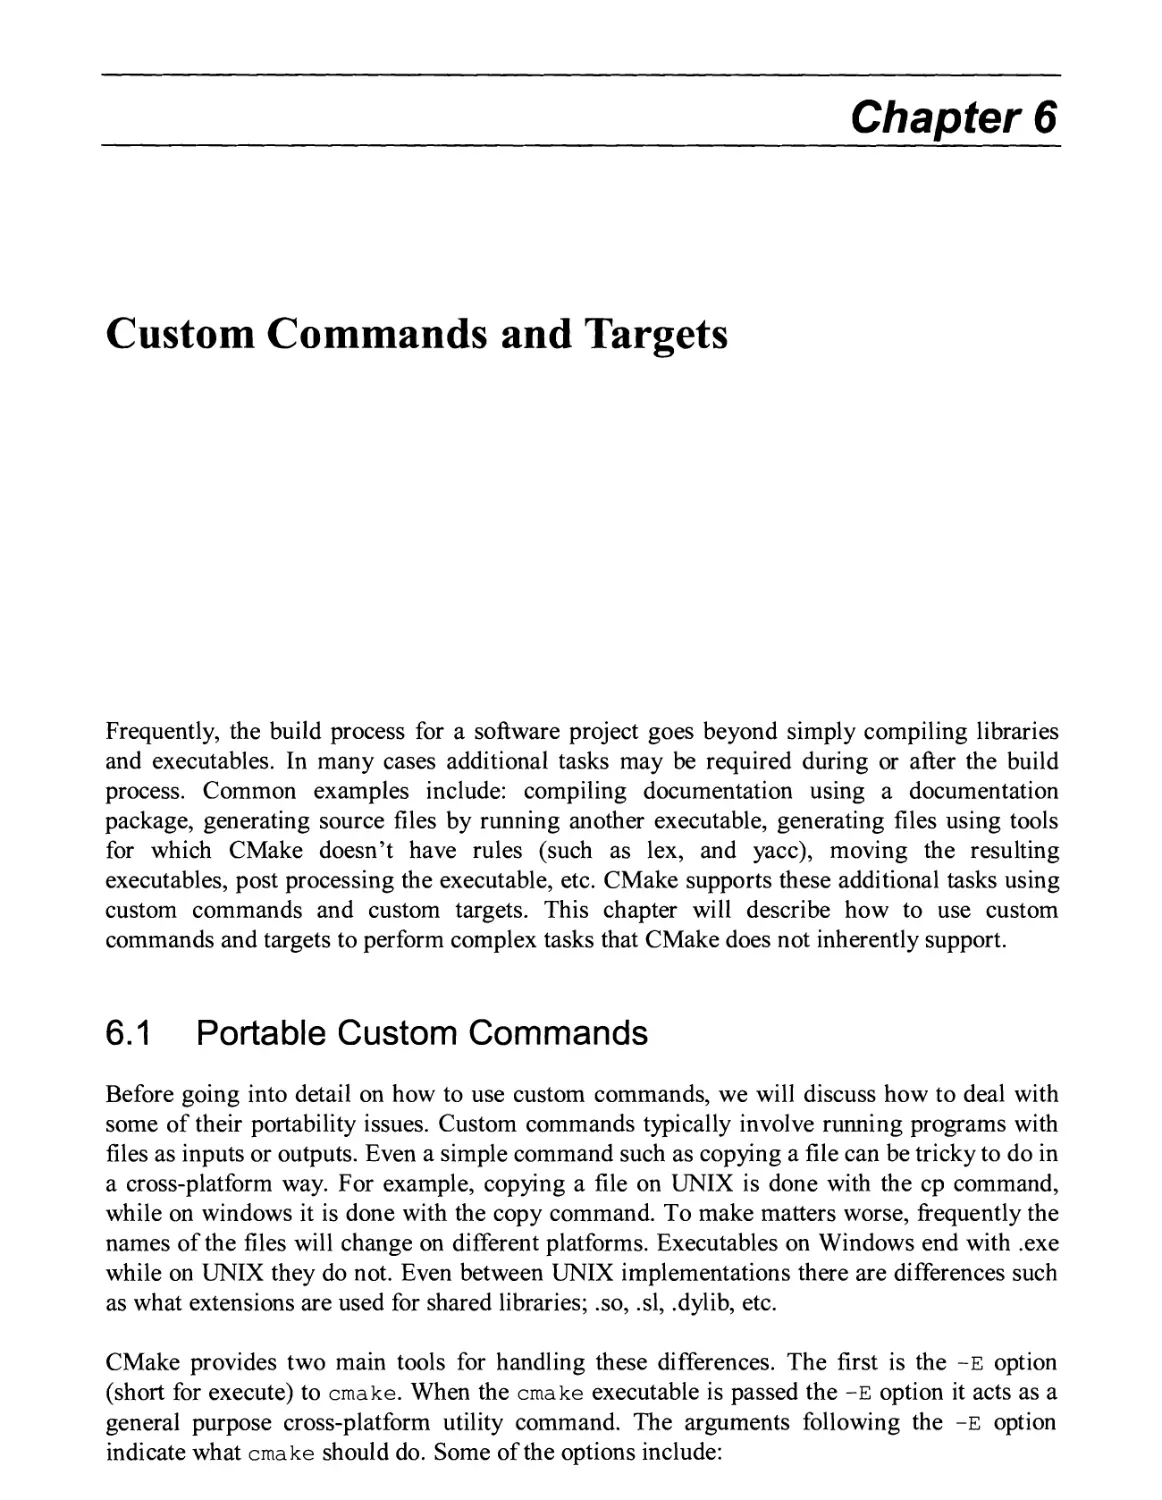 6. CUSTOM COMMANDS AND TARGETS